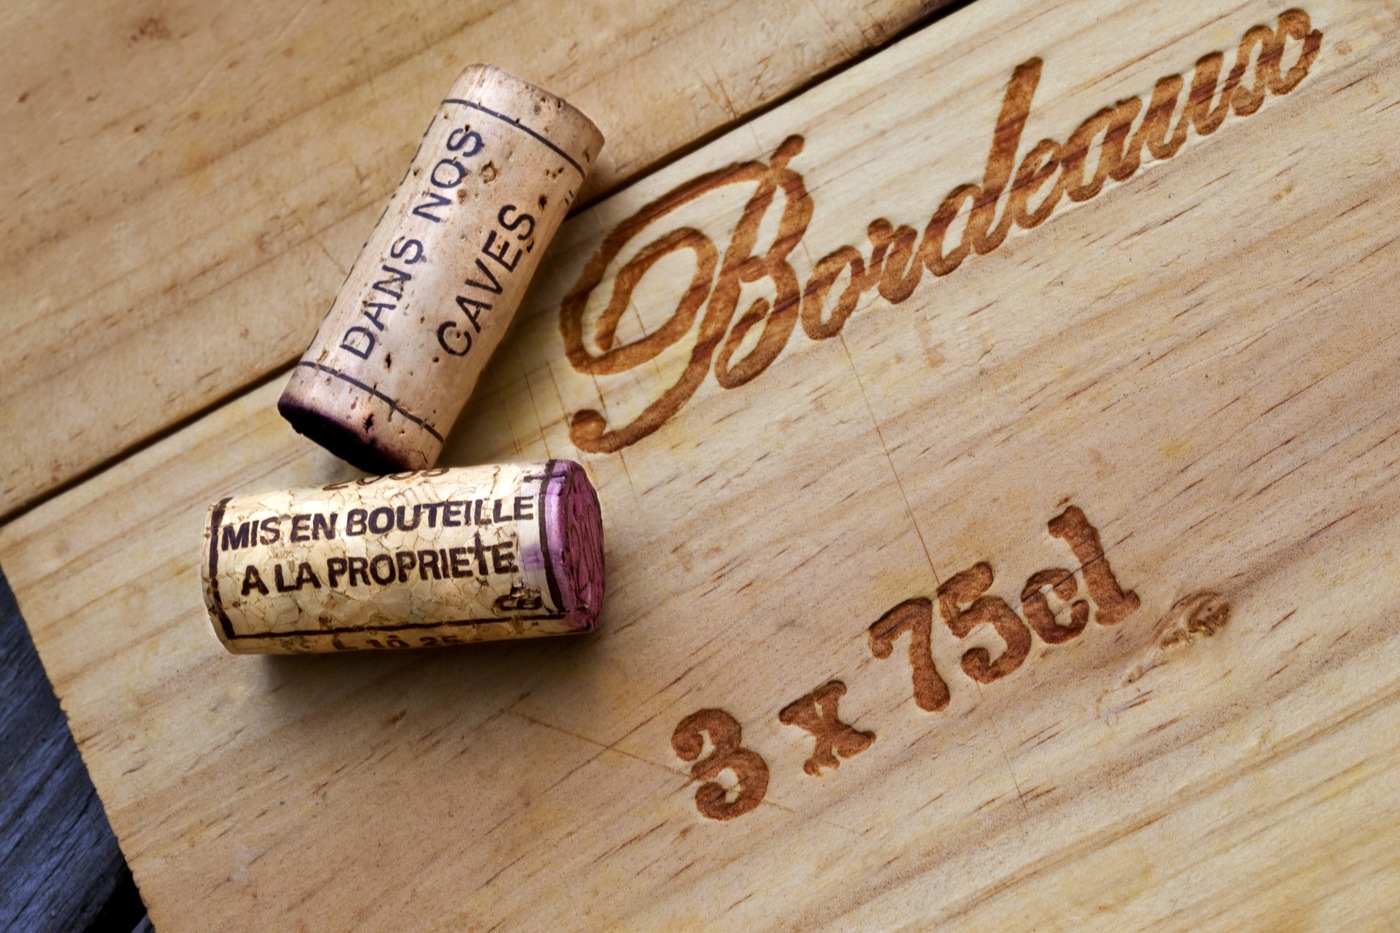 Bordeaux wine crates and corks